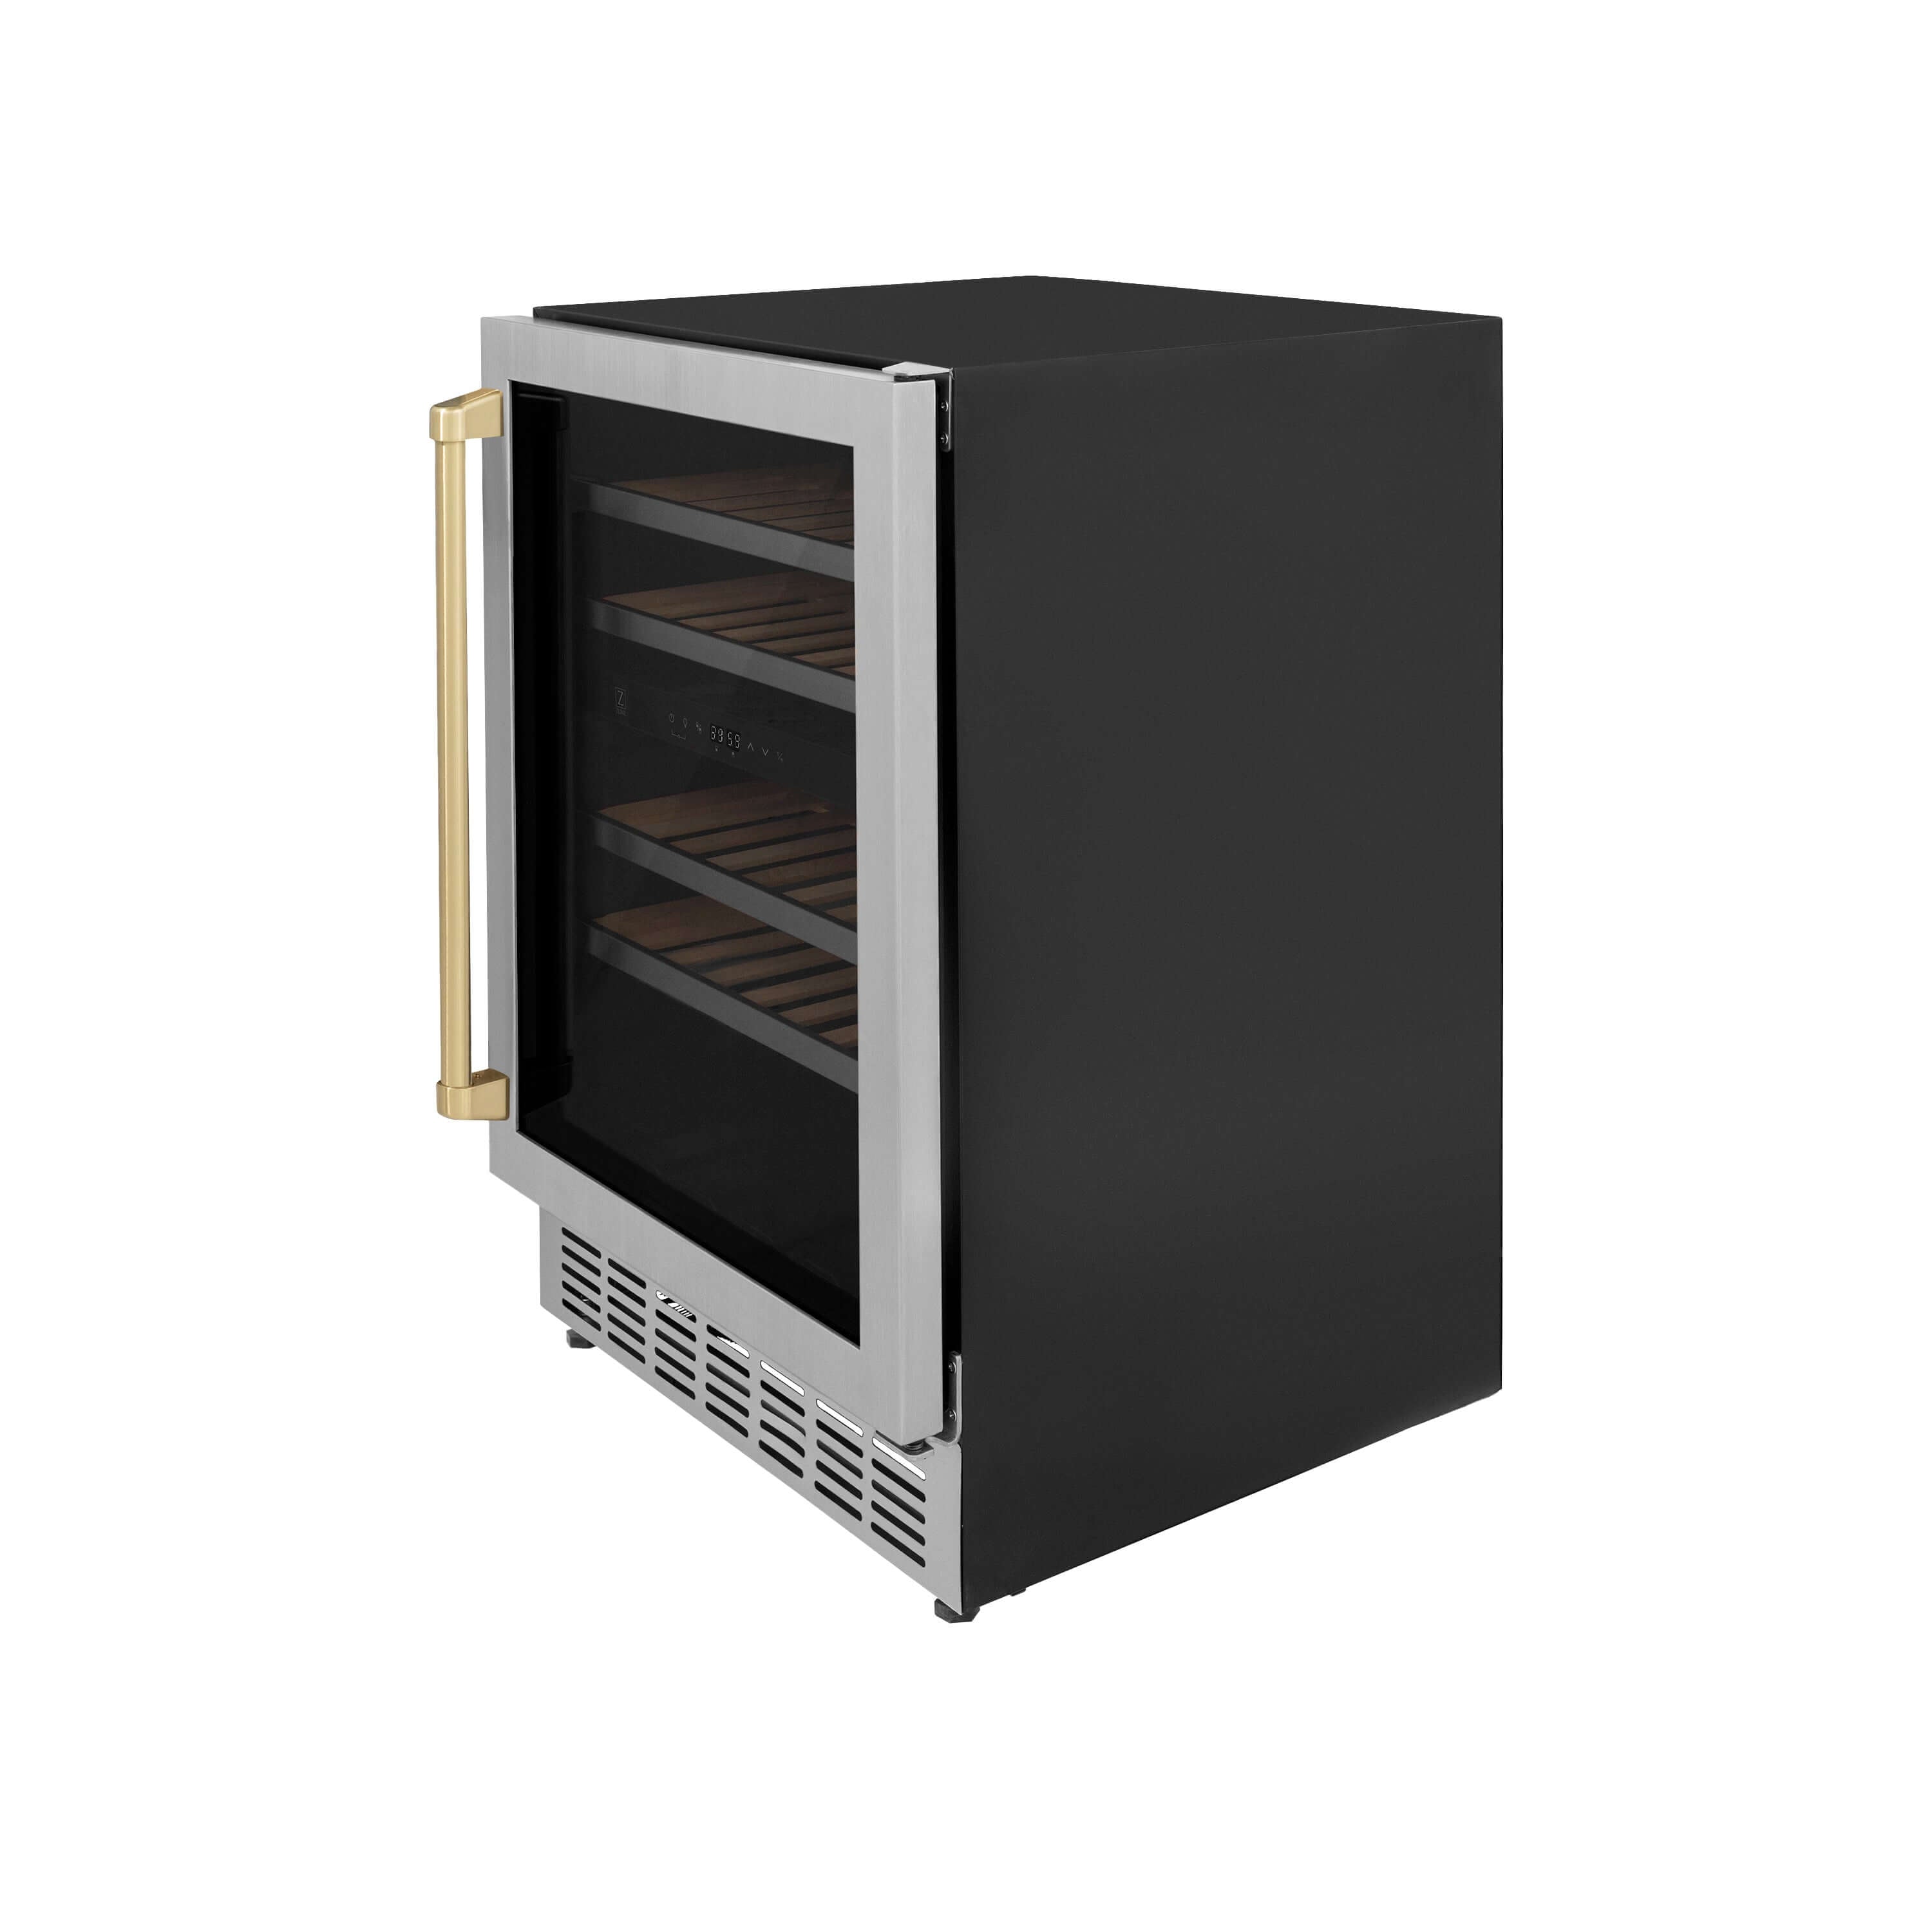 ZLINE 24 in. Monument Autograph Edition Dual Zone 44-Bottle Wine Cooler in Stainless Steel with Champagne Bronze Accents (RWVZ-UD-24-CB)